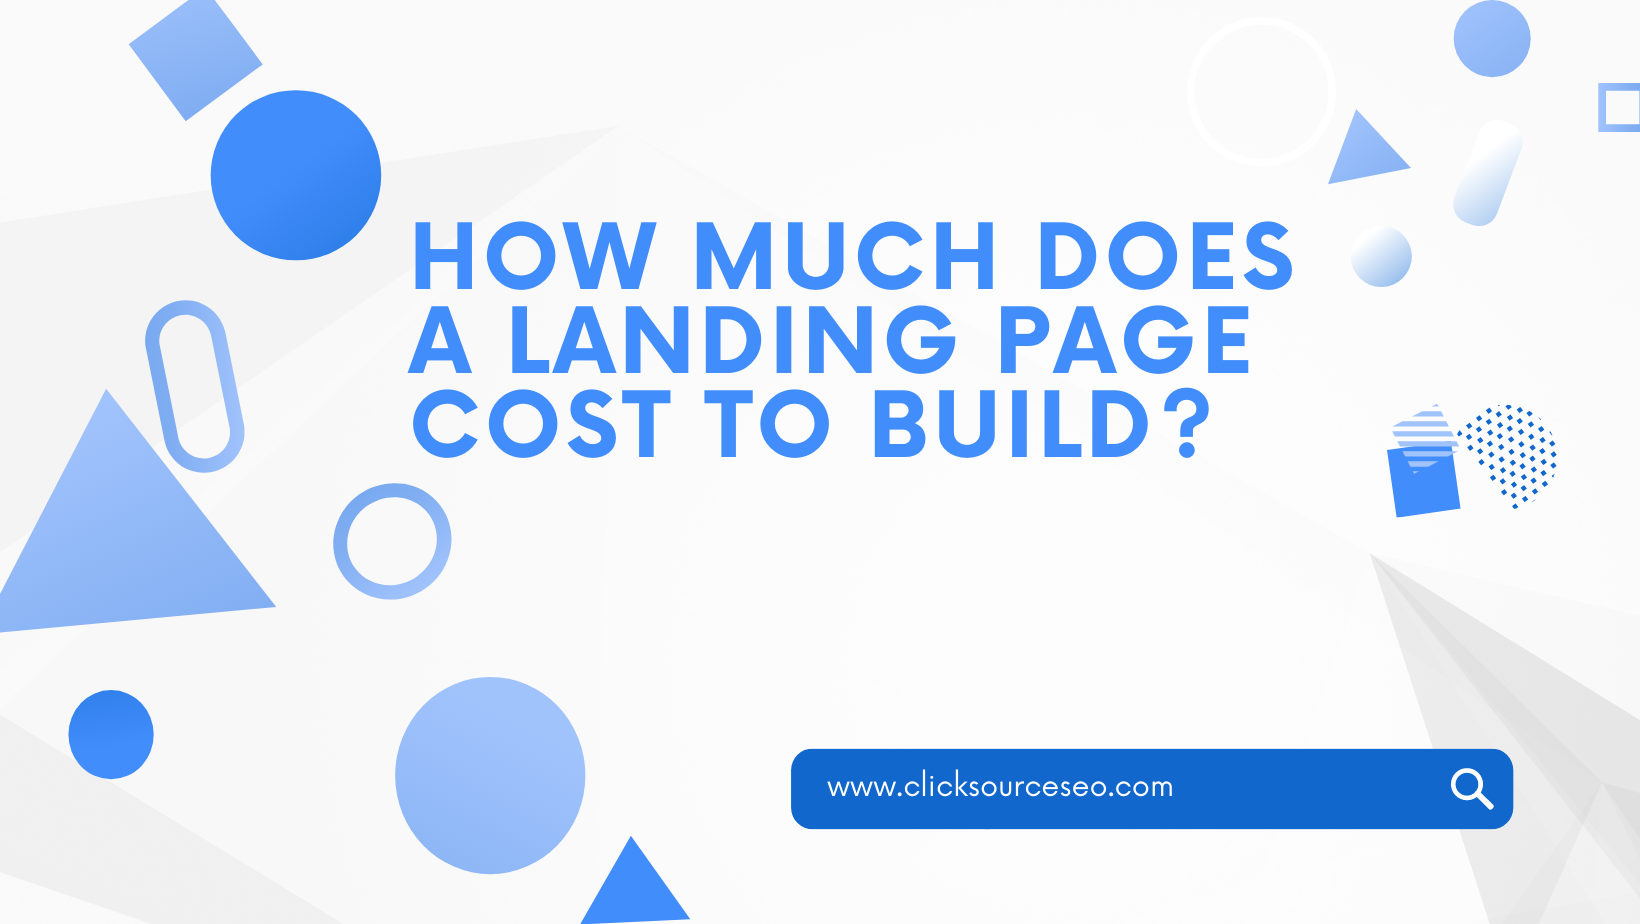 Cost of building a landing page photo